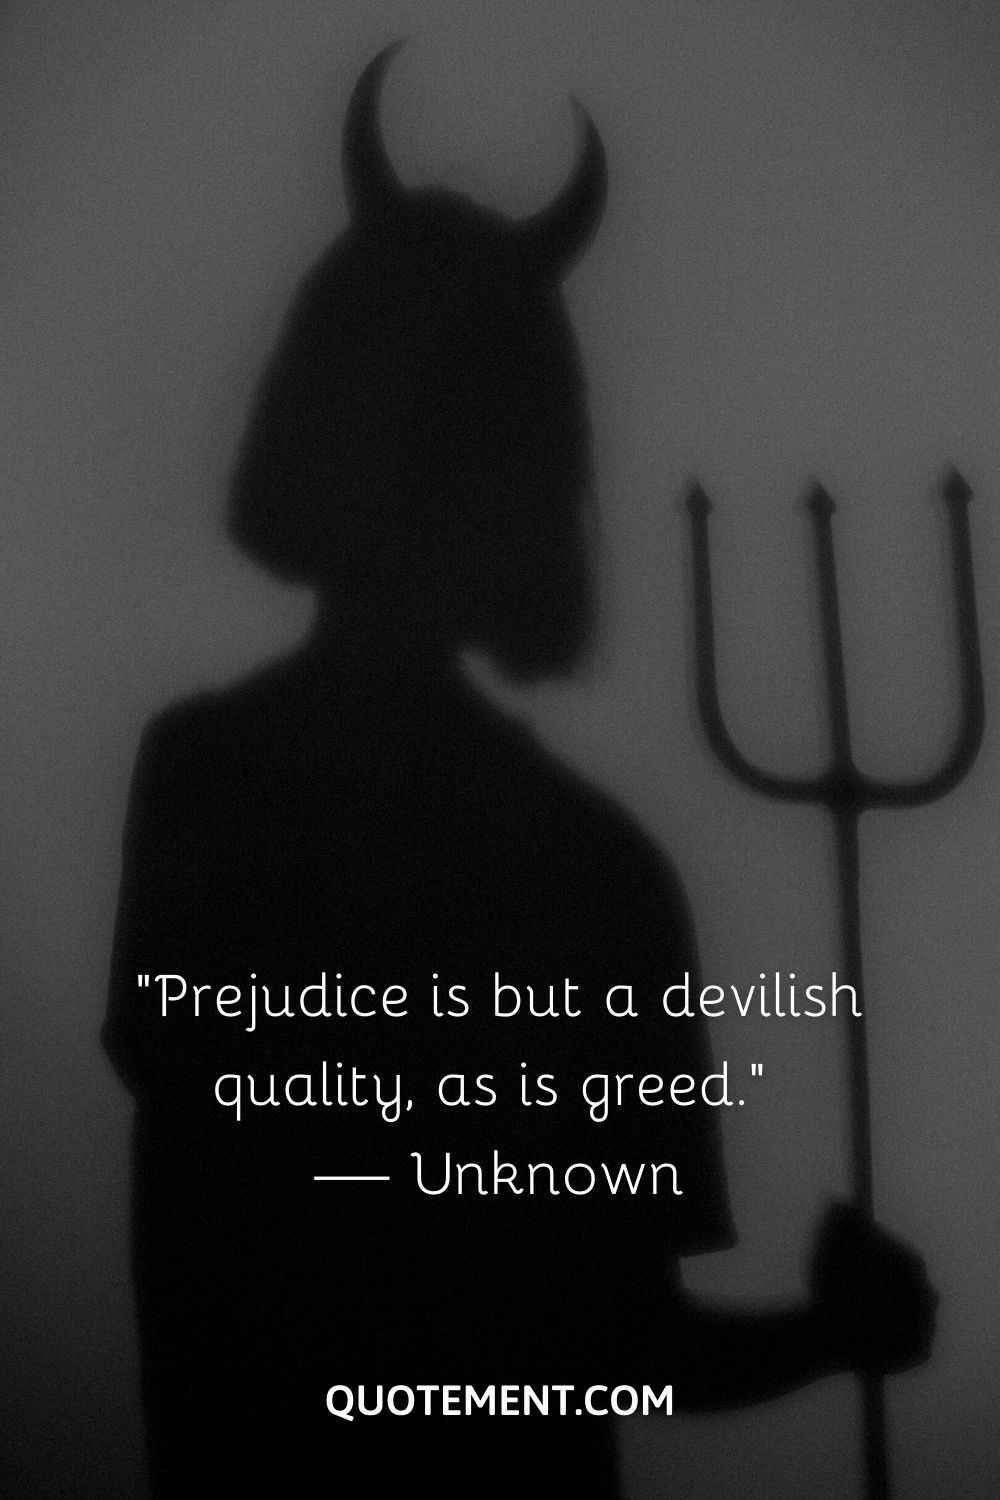 “Prejudice is but a devilish quality, as is greed.” — Unknown